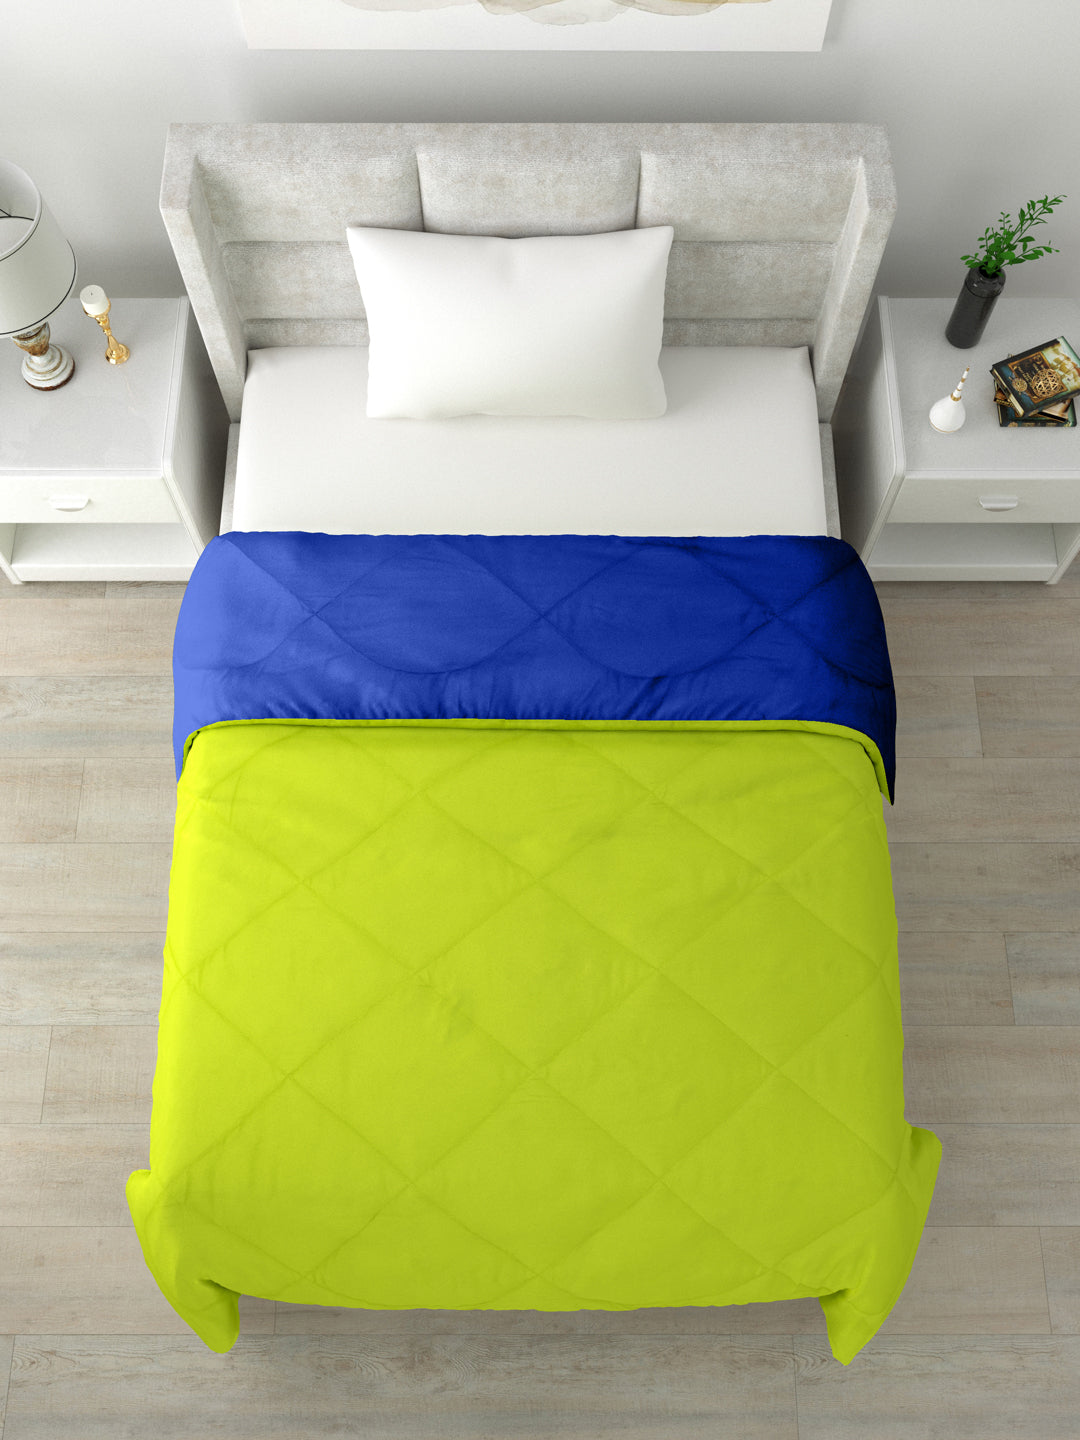 Reversible Single Bed Comforter 200 GSM 60x90 Inches (Blue & Green)